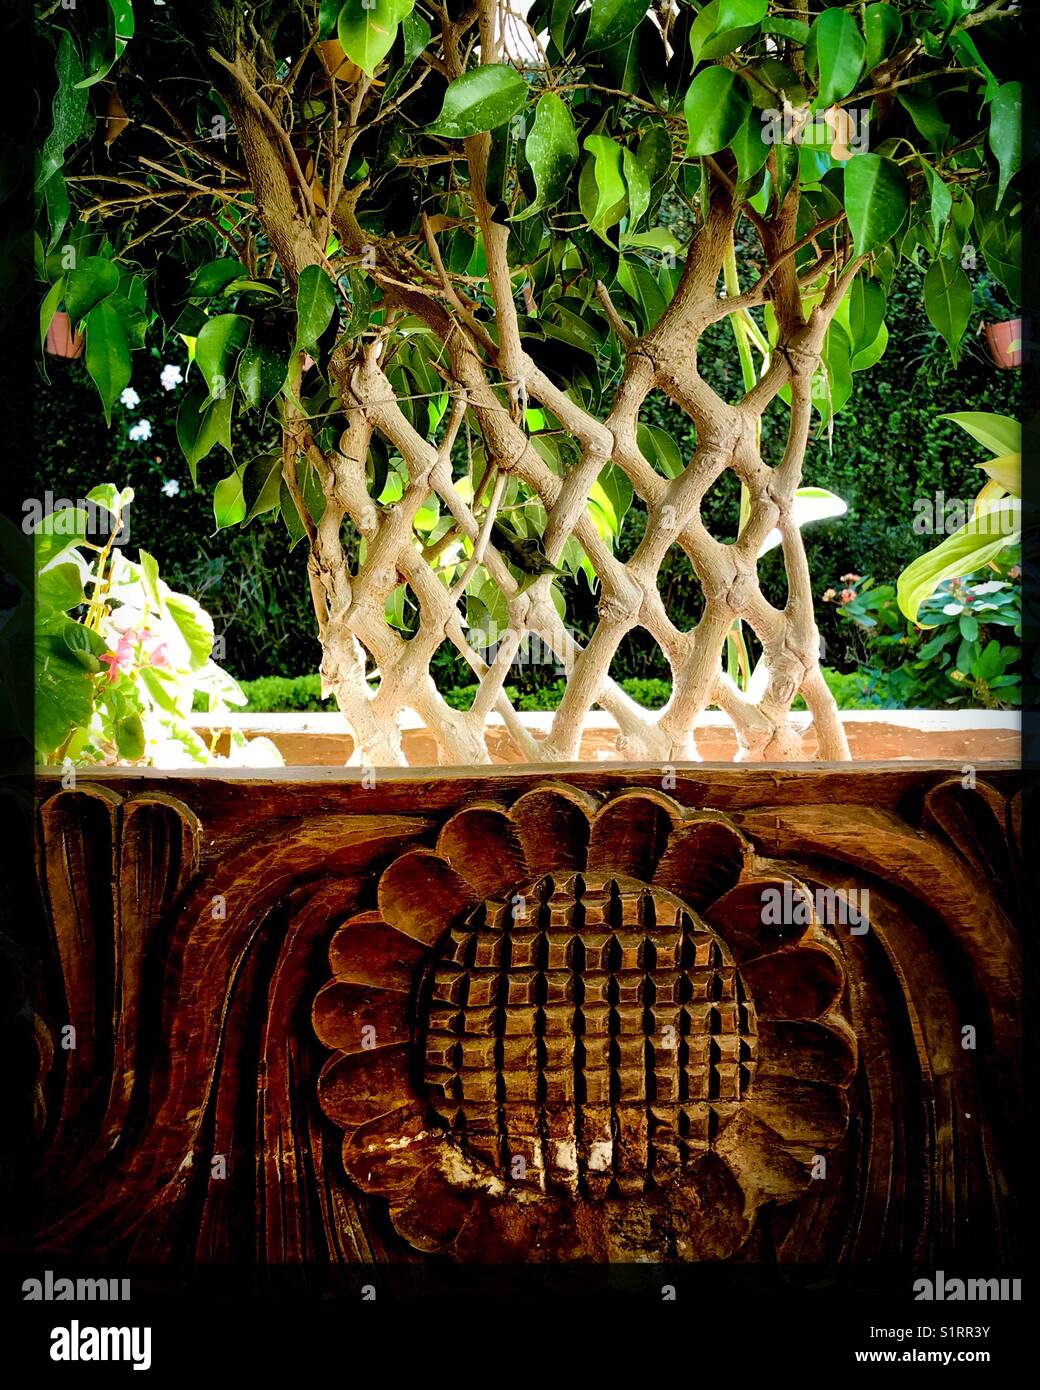 A beautiful ficus tree with a braided trunk grows in a lovely carved wooden planter in an outdoor patio garden. Stock Photo